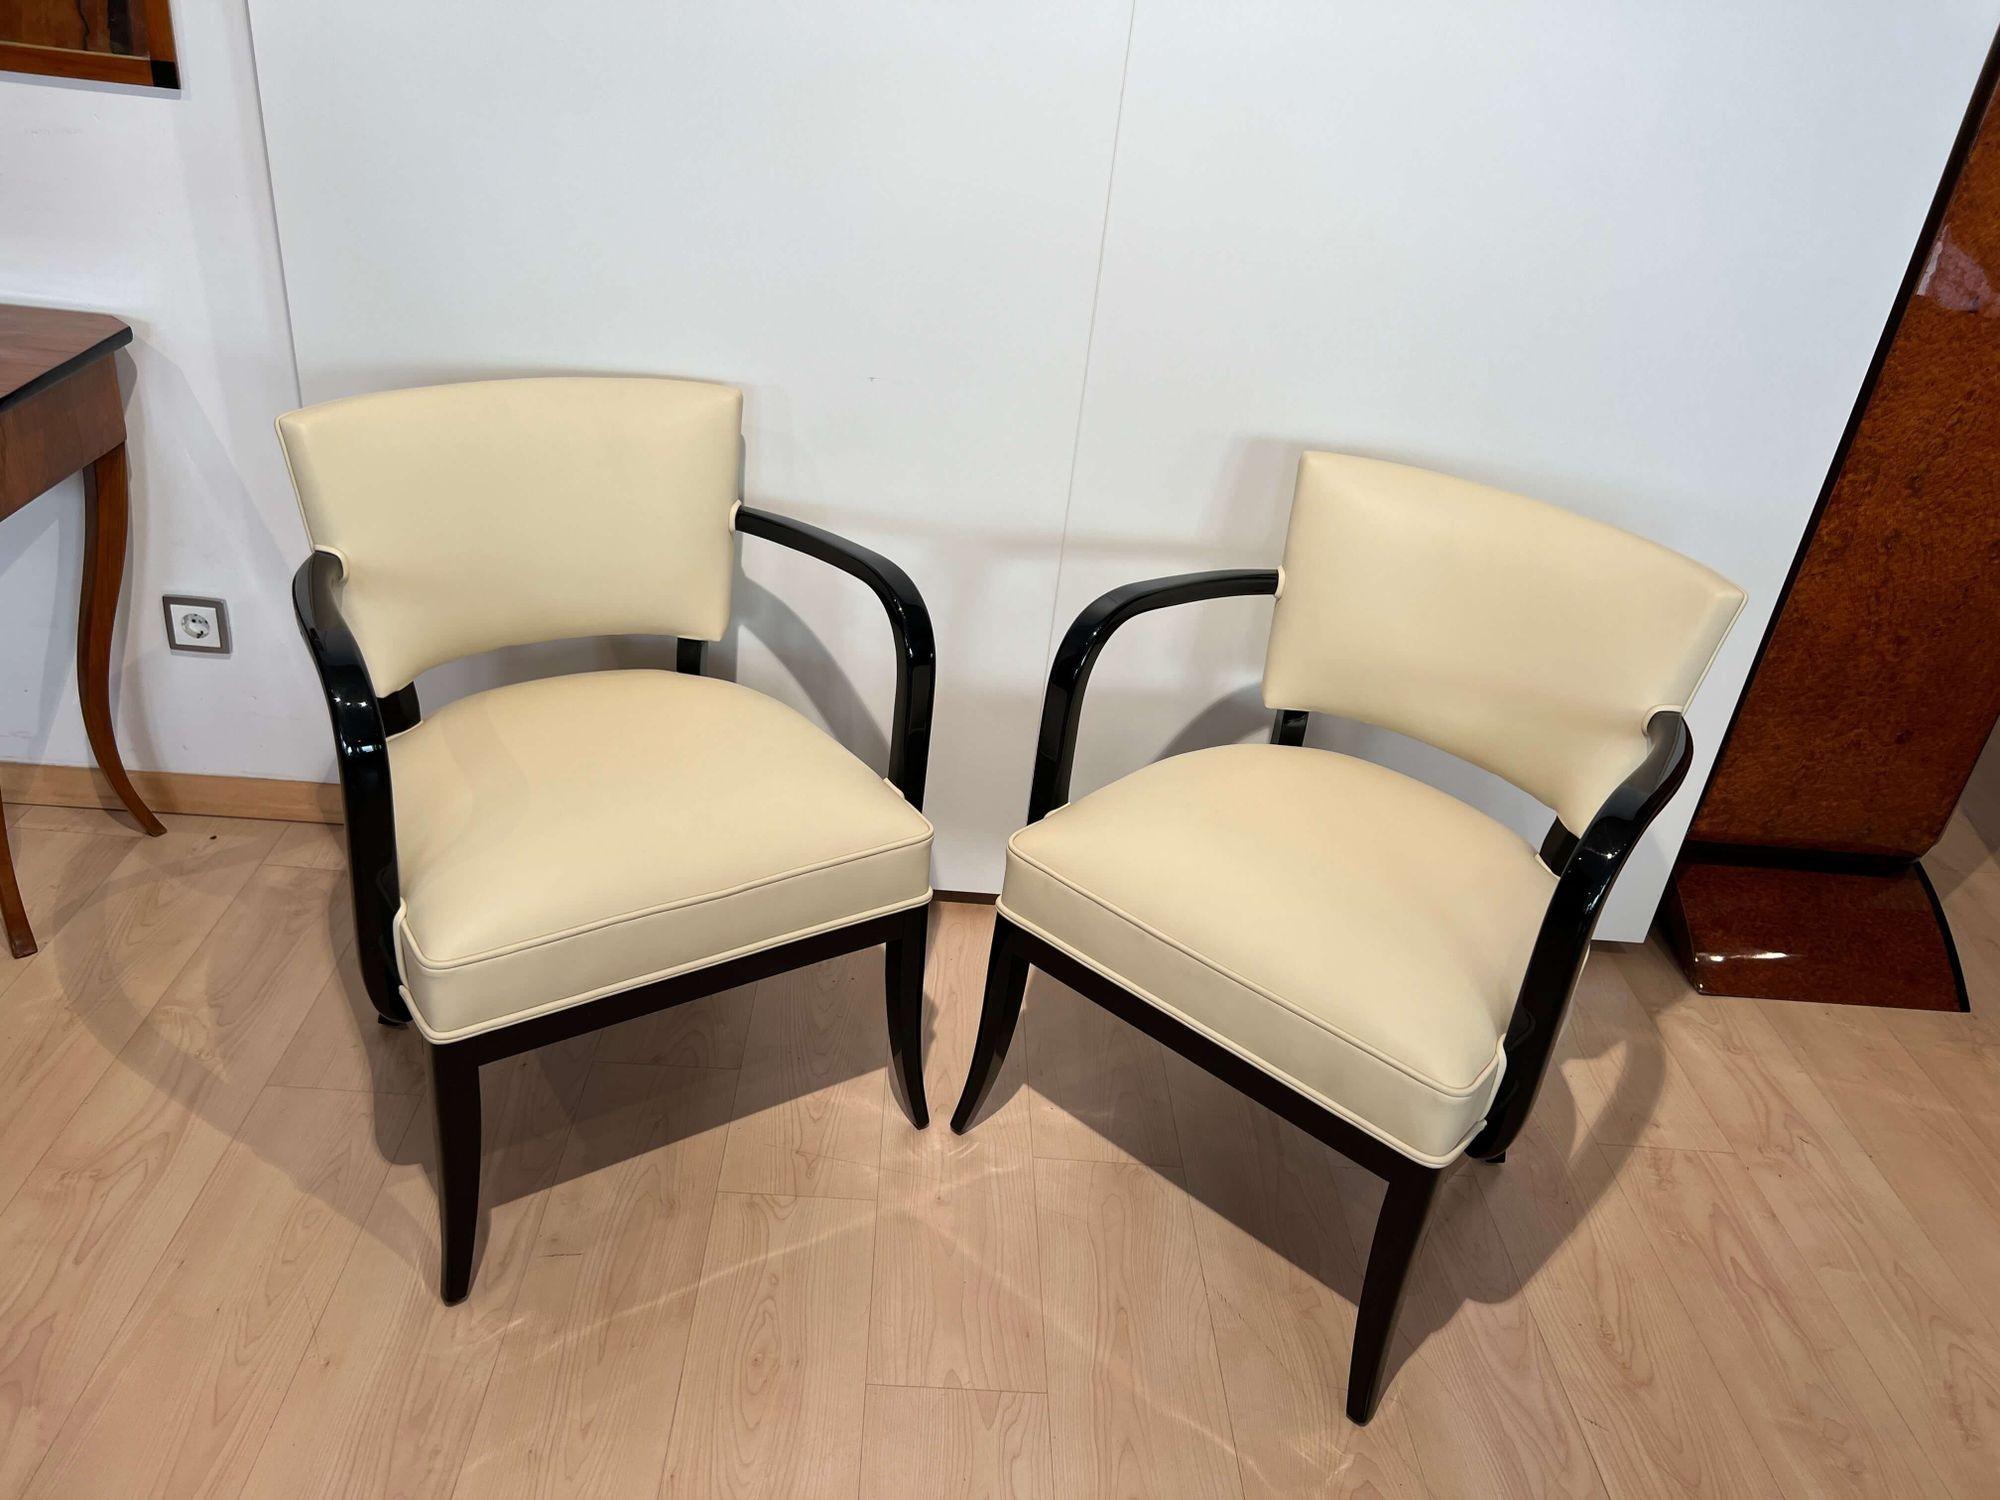 Mid-20th Century Pair of Art Deco Armchairs, Black Lacquer, Creme Leather, France, 1930s For Sale